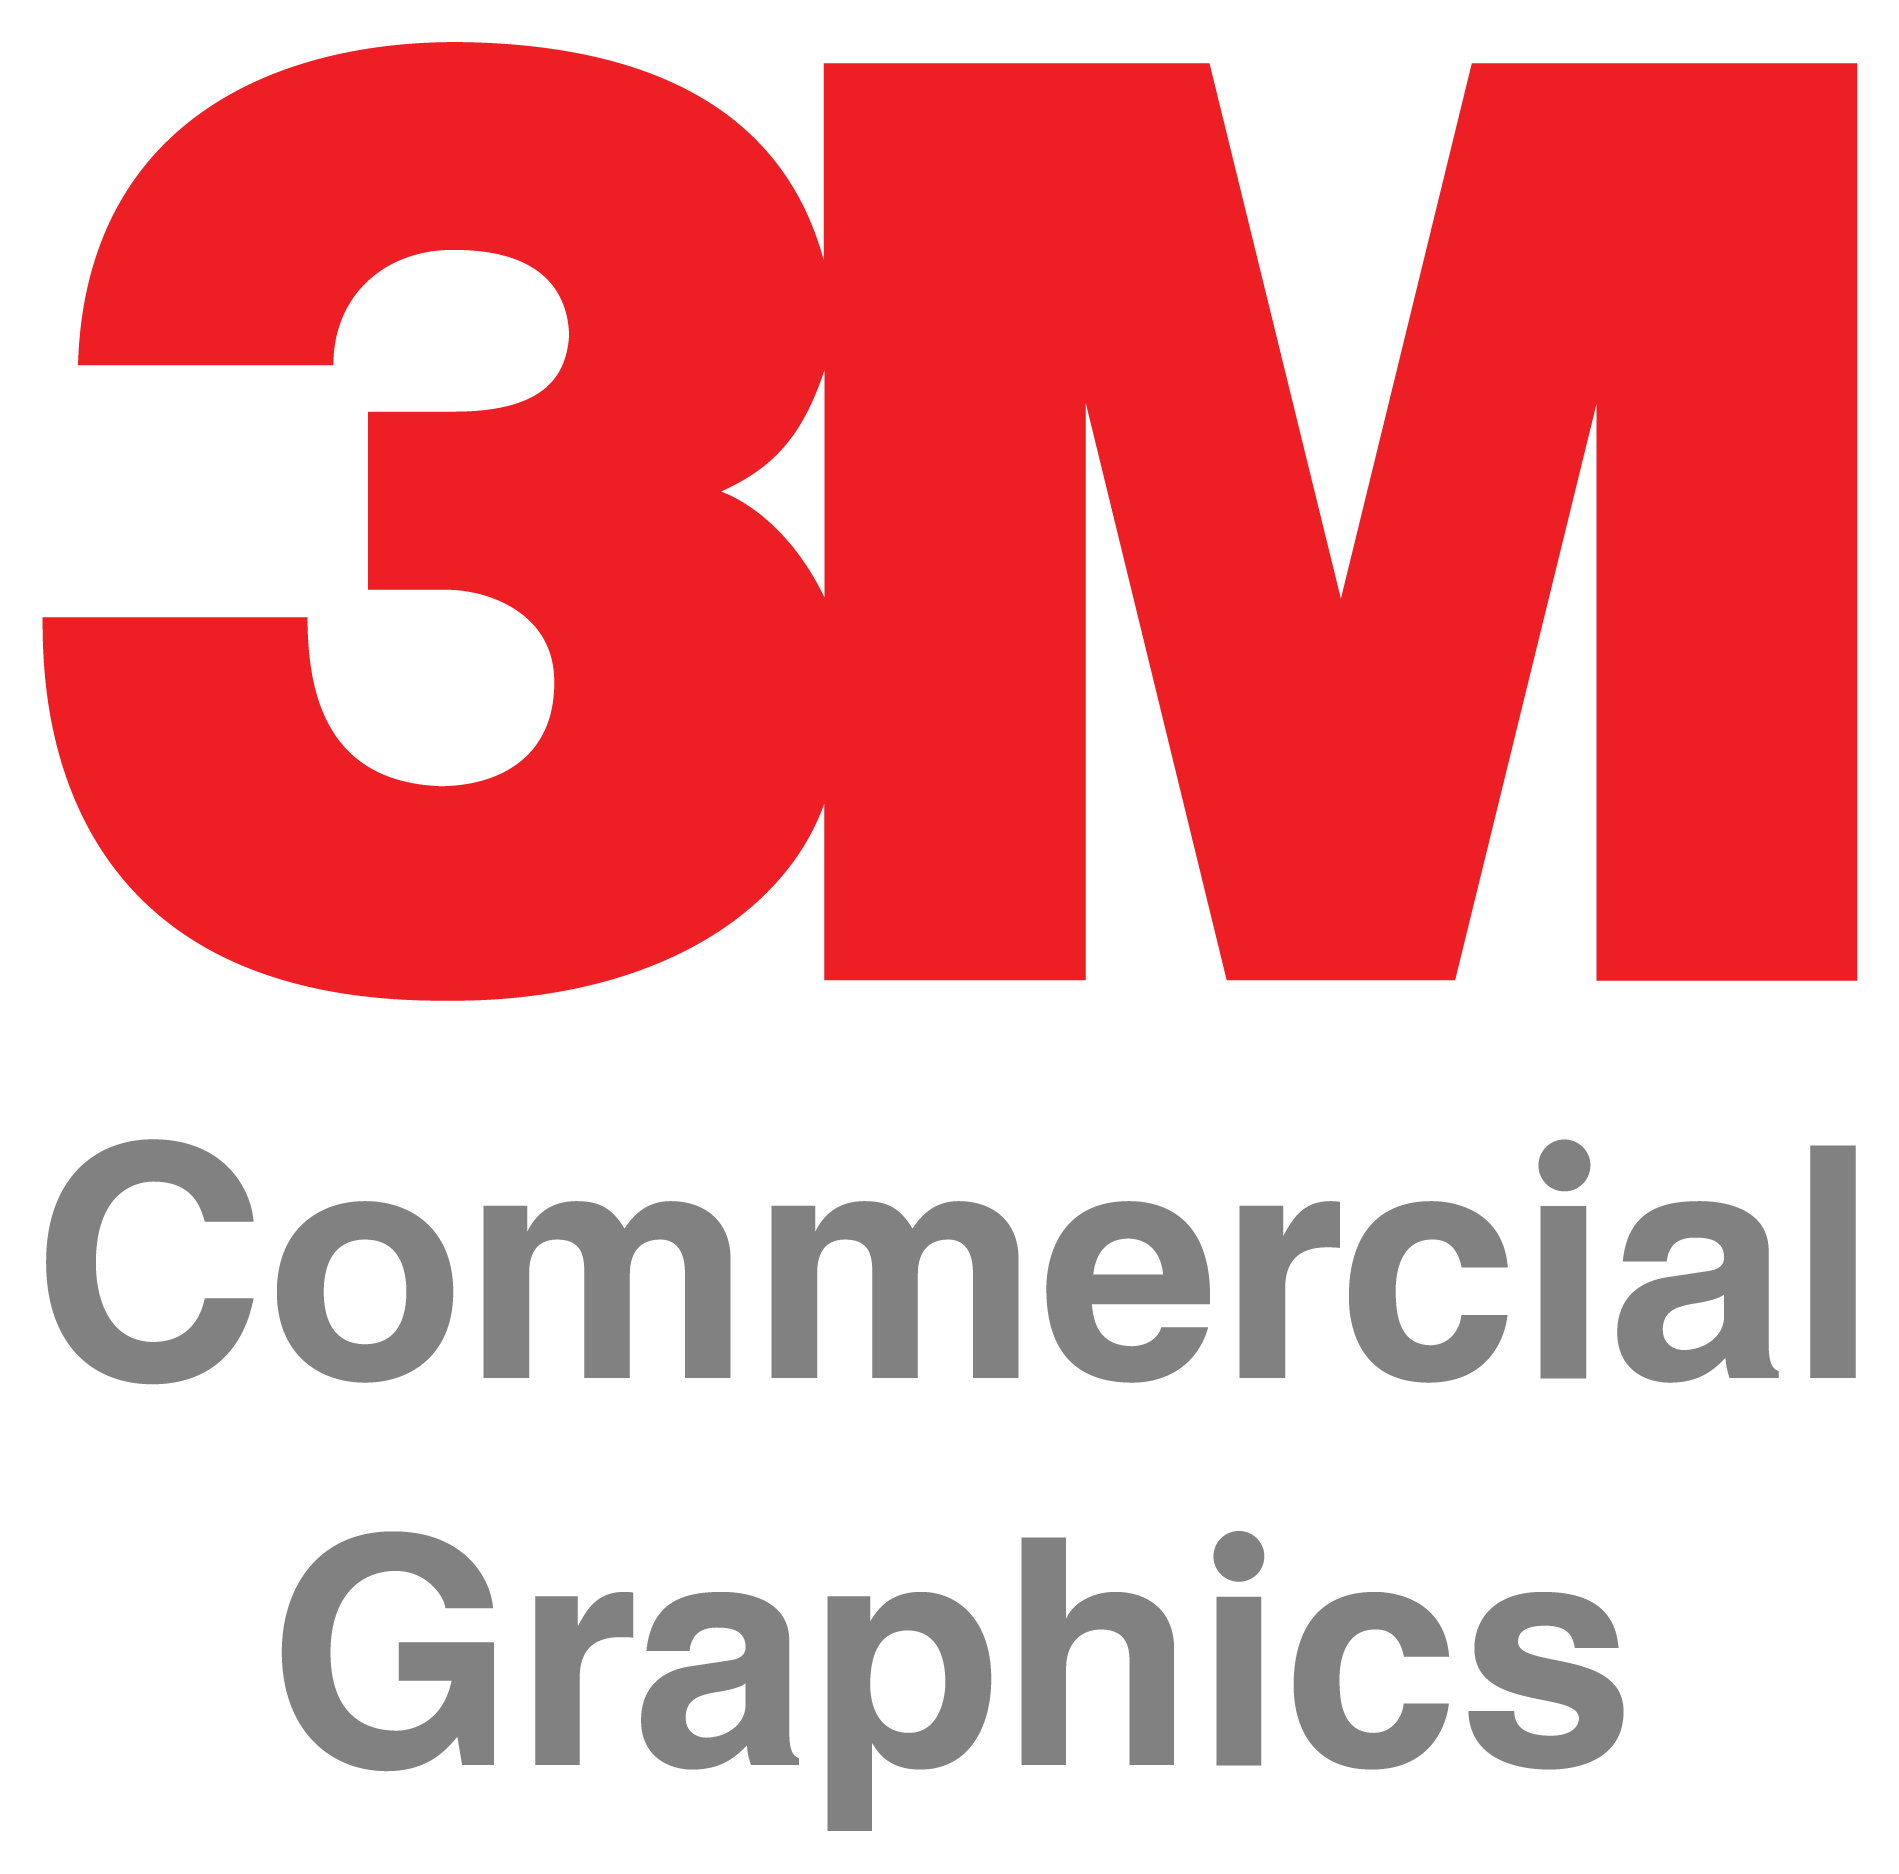 3MCommercial graphics.png